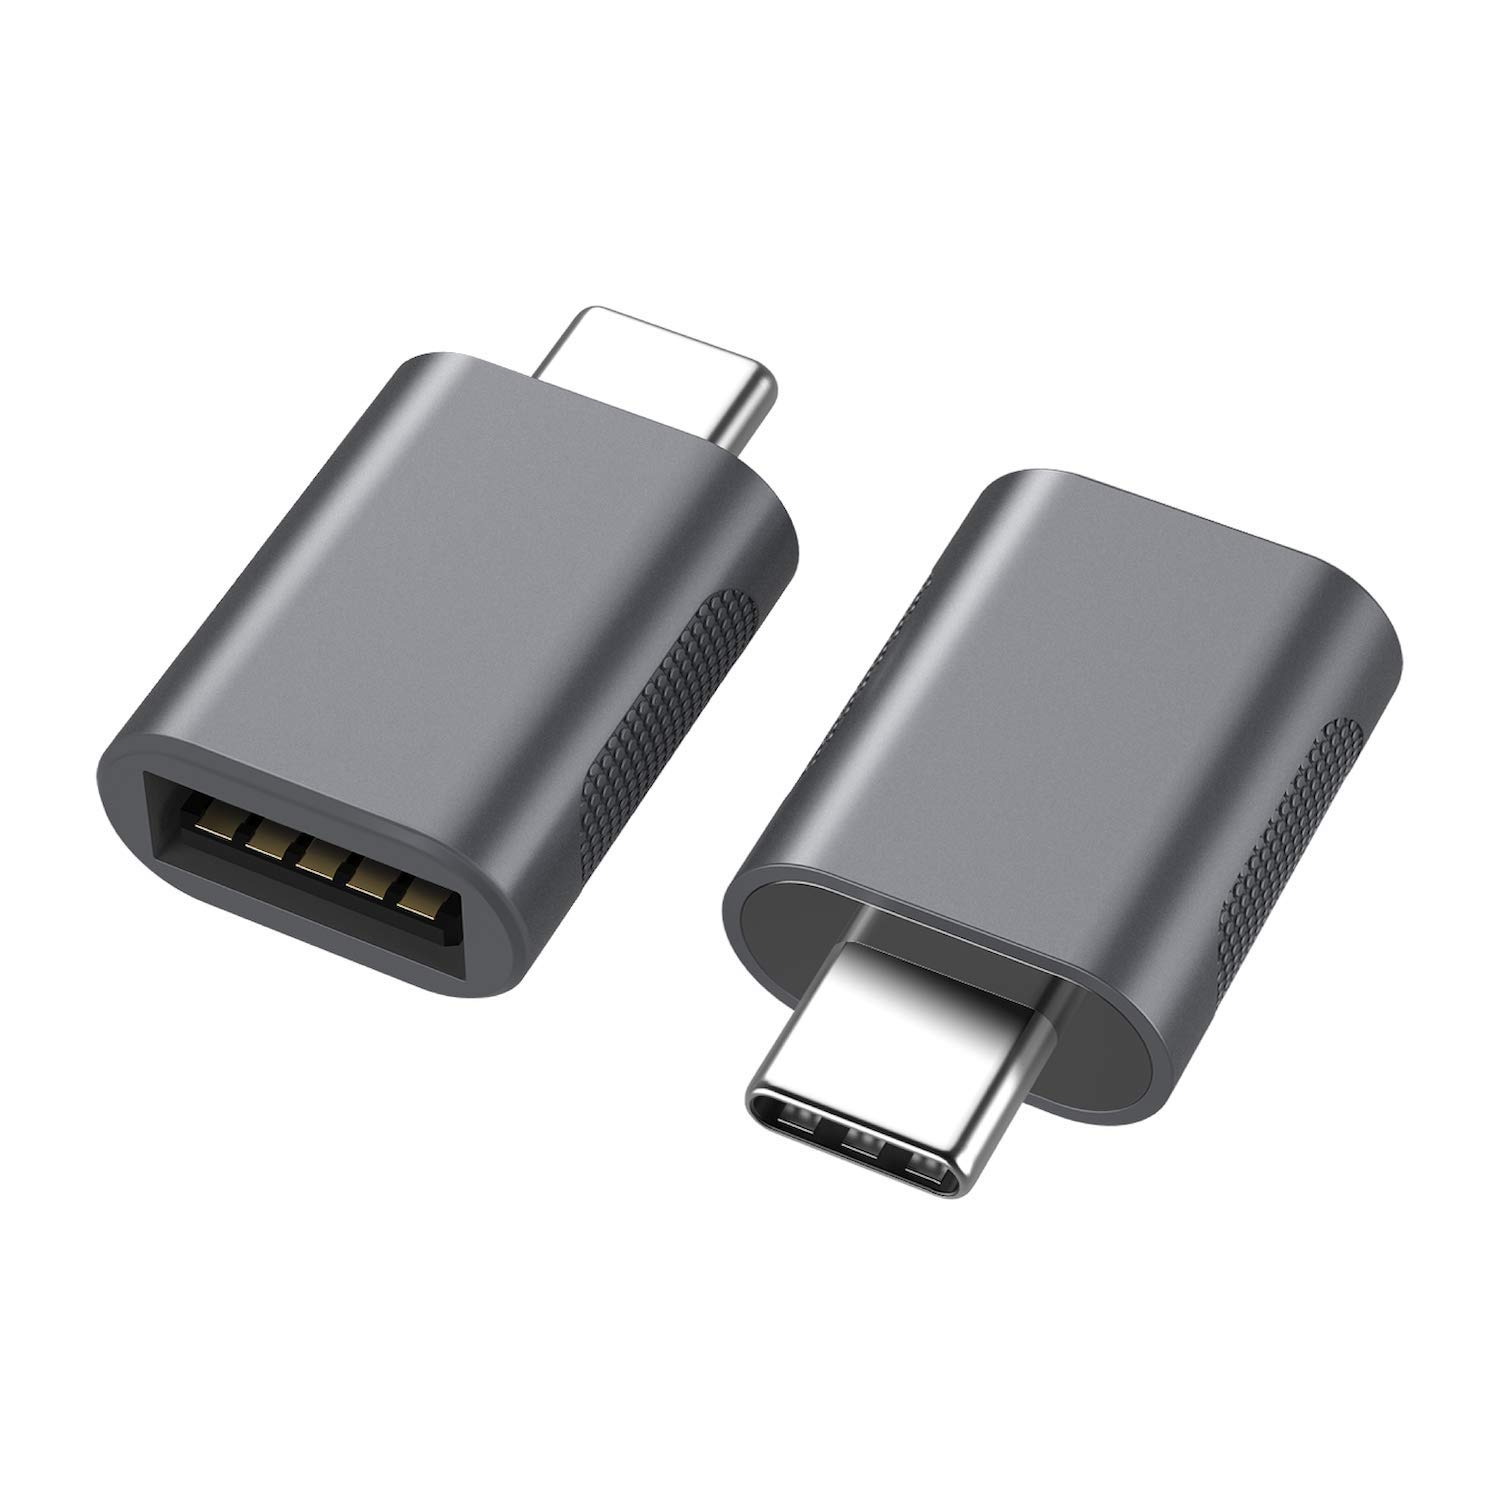 nonda USB C to USB 3.0 Adapter(2 Pack),USB to USB C Adapter,USB Type-C to USB,Thunderbolt 4/3 to USB Female Adapter OTG for MacBook Pro2021,MacBook Air 2020,iPad Pro 2021,More Type-C Devices